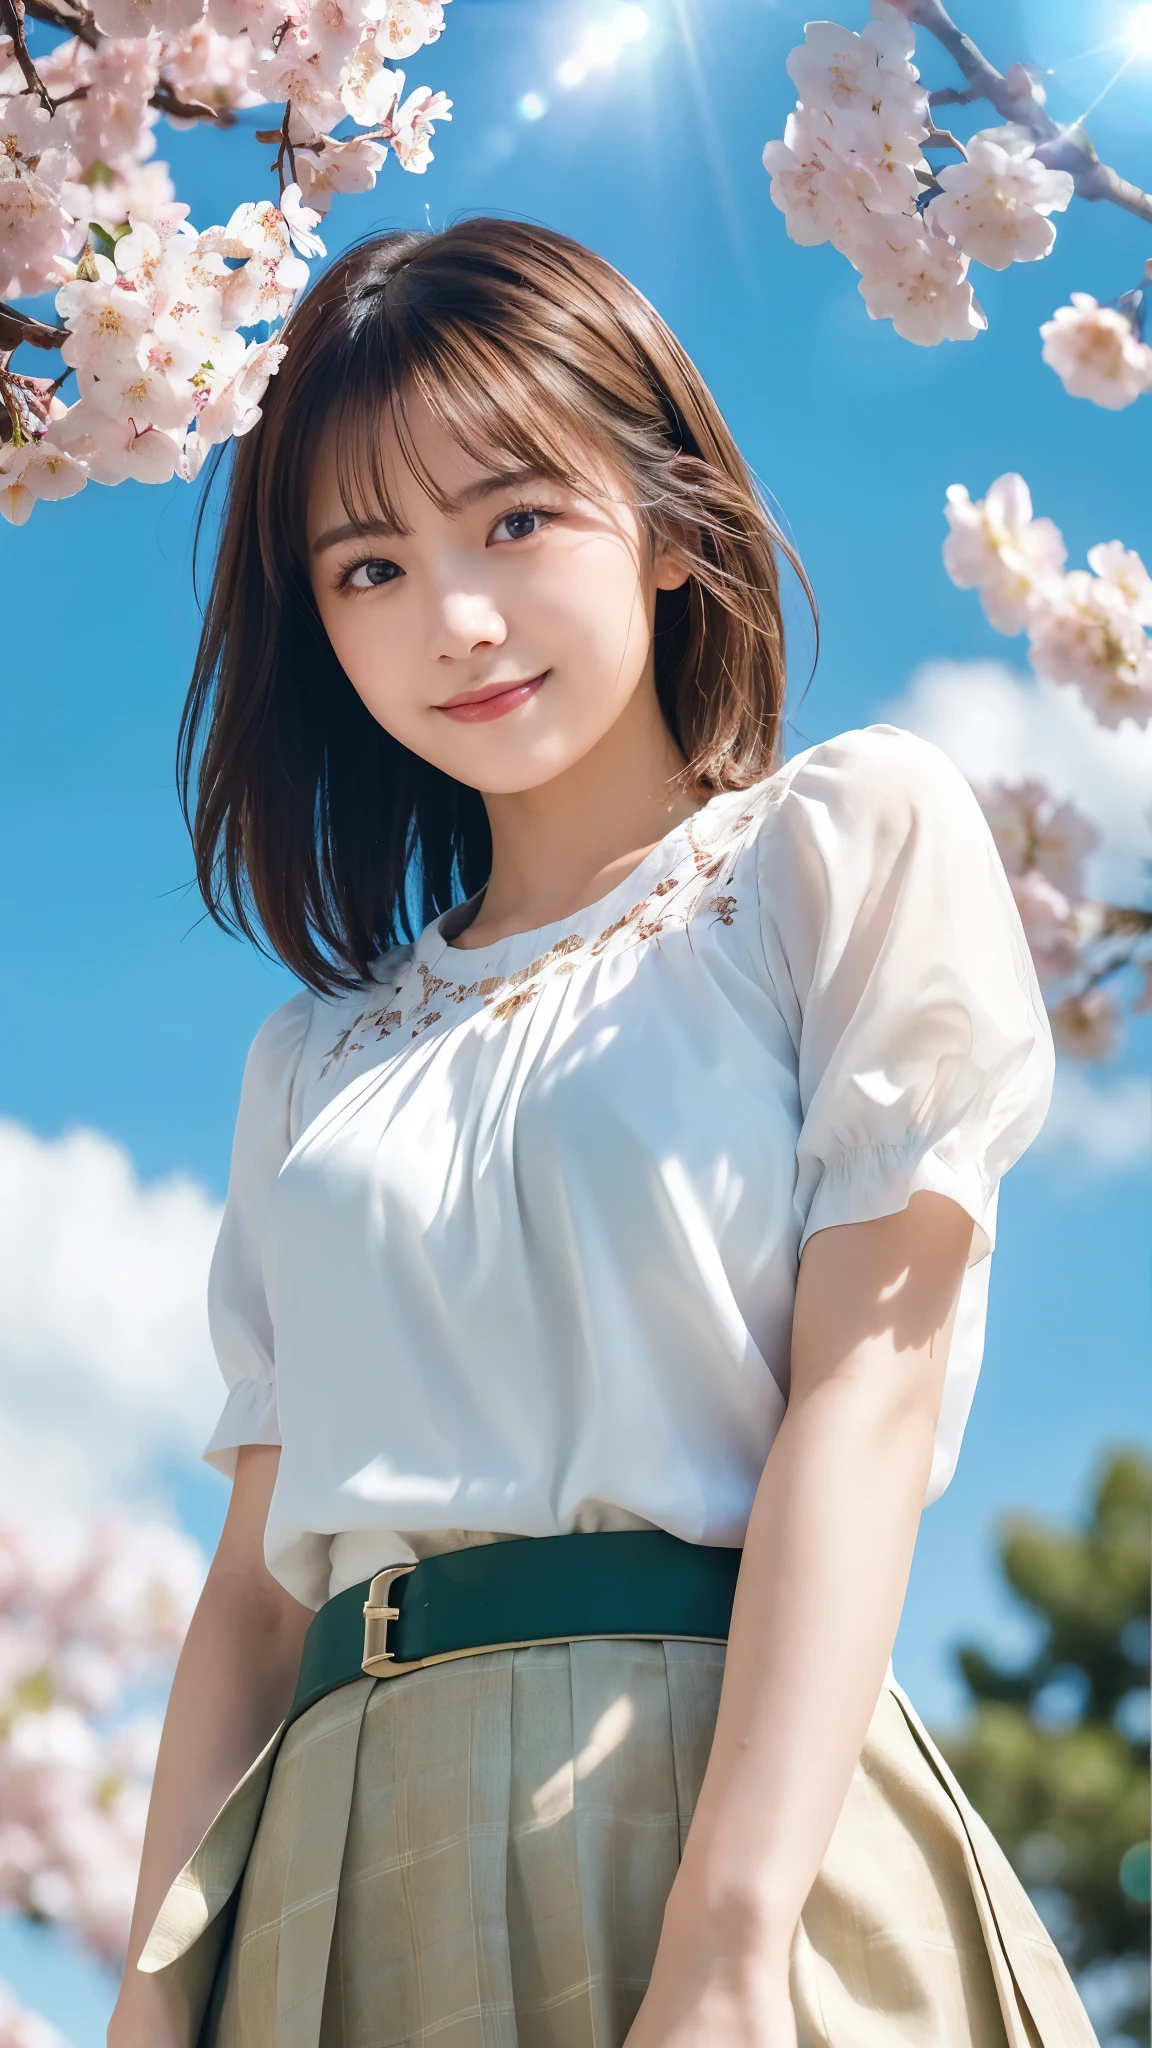 (highest quality,masterpiece:1.3,ultra high resolution),(Super detailed,caustics,8k),(photorealistic:1.4,RAW shooting),1 girl,Are standing,(smile),stare at the camera,20-year-old,cute,Japanese,natural brown middle hair,(white blouse),lime green flared skirt,glamorous,(big ),(face focus),buckshot,grass,cherry blossoms,blue sky,sun,Natural light,(Lens flare),professional writing,(full body shot),(Tilt composition:1.3),(low position:1.4),(Low - Angle:1.4)